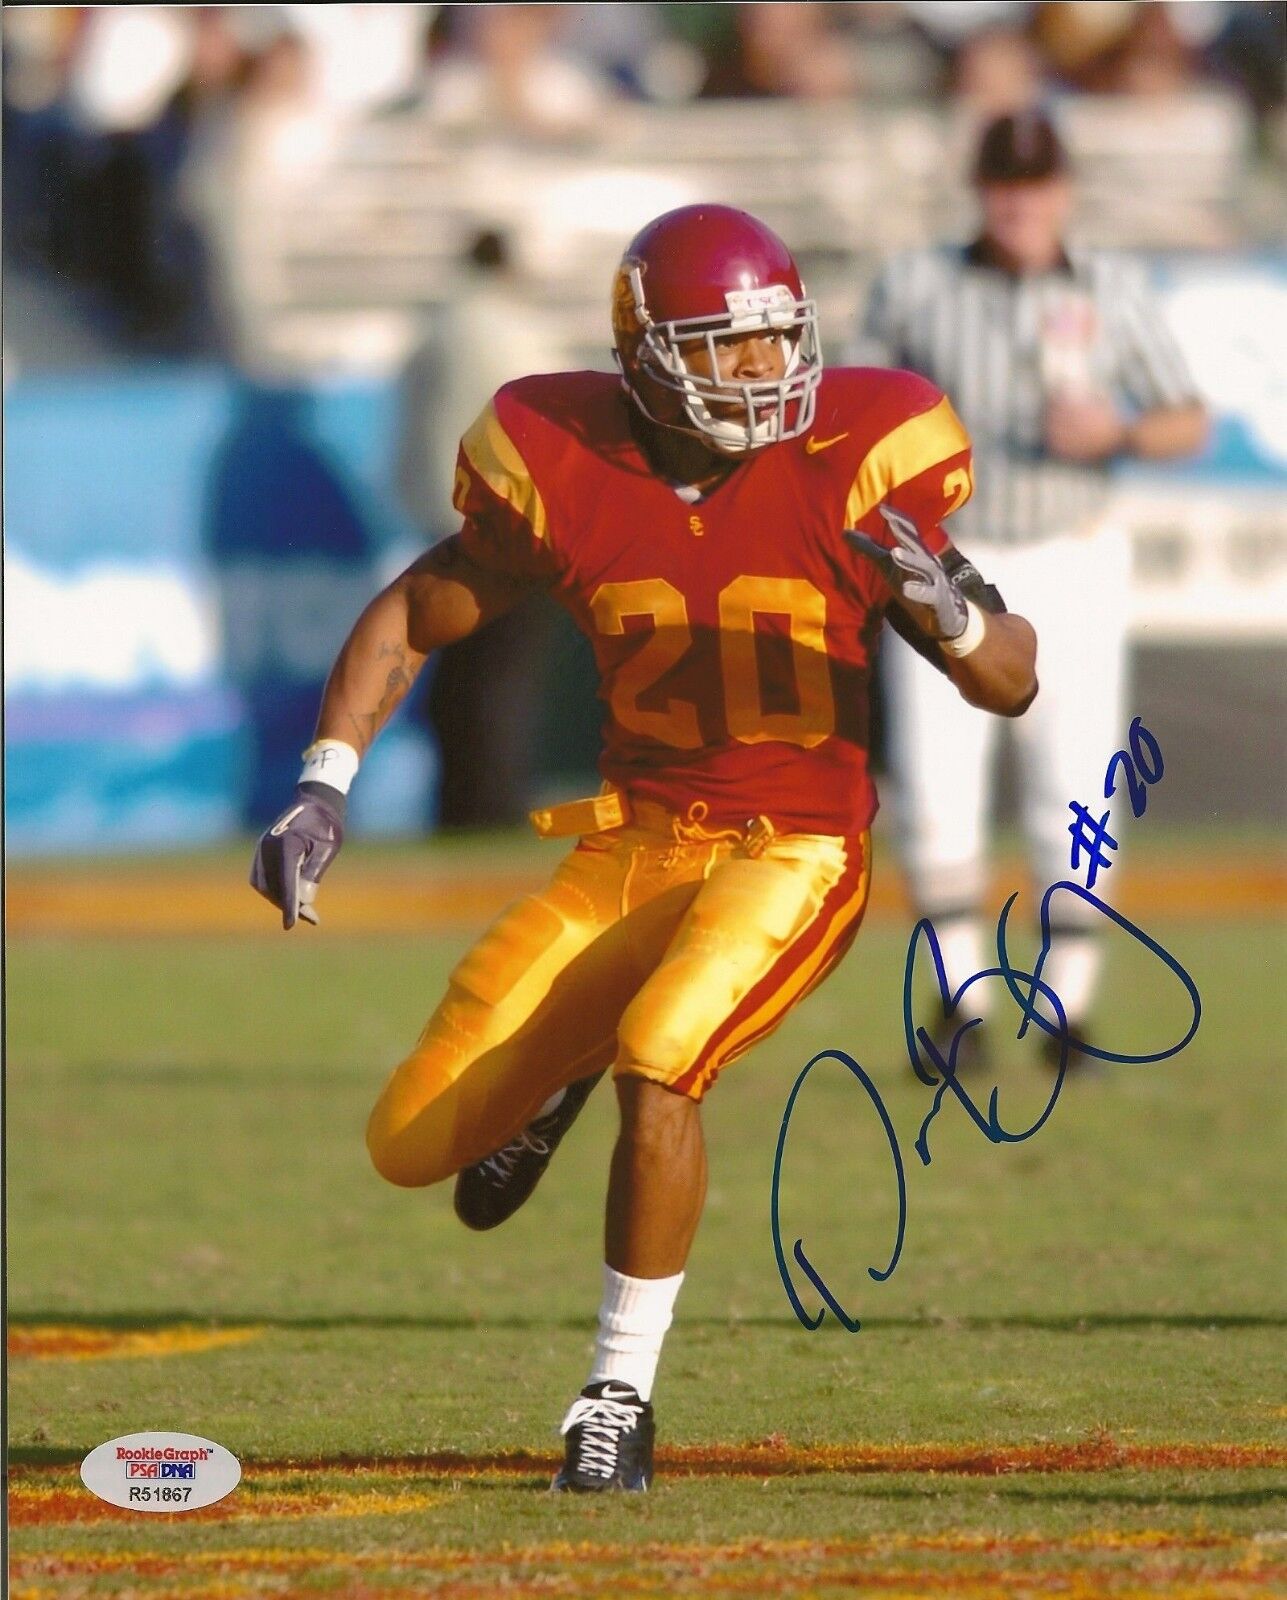 Darnell Bing Signed USC Trojans 8x10 Photo Poster painting PSA/DNA COA Picture Autograph 2003-04